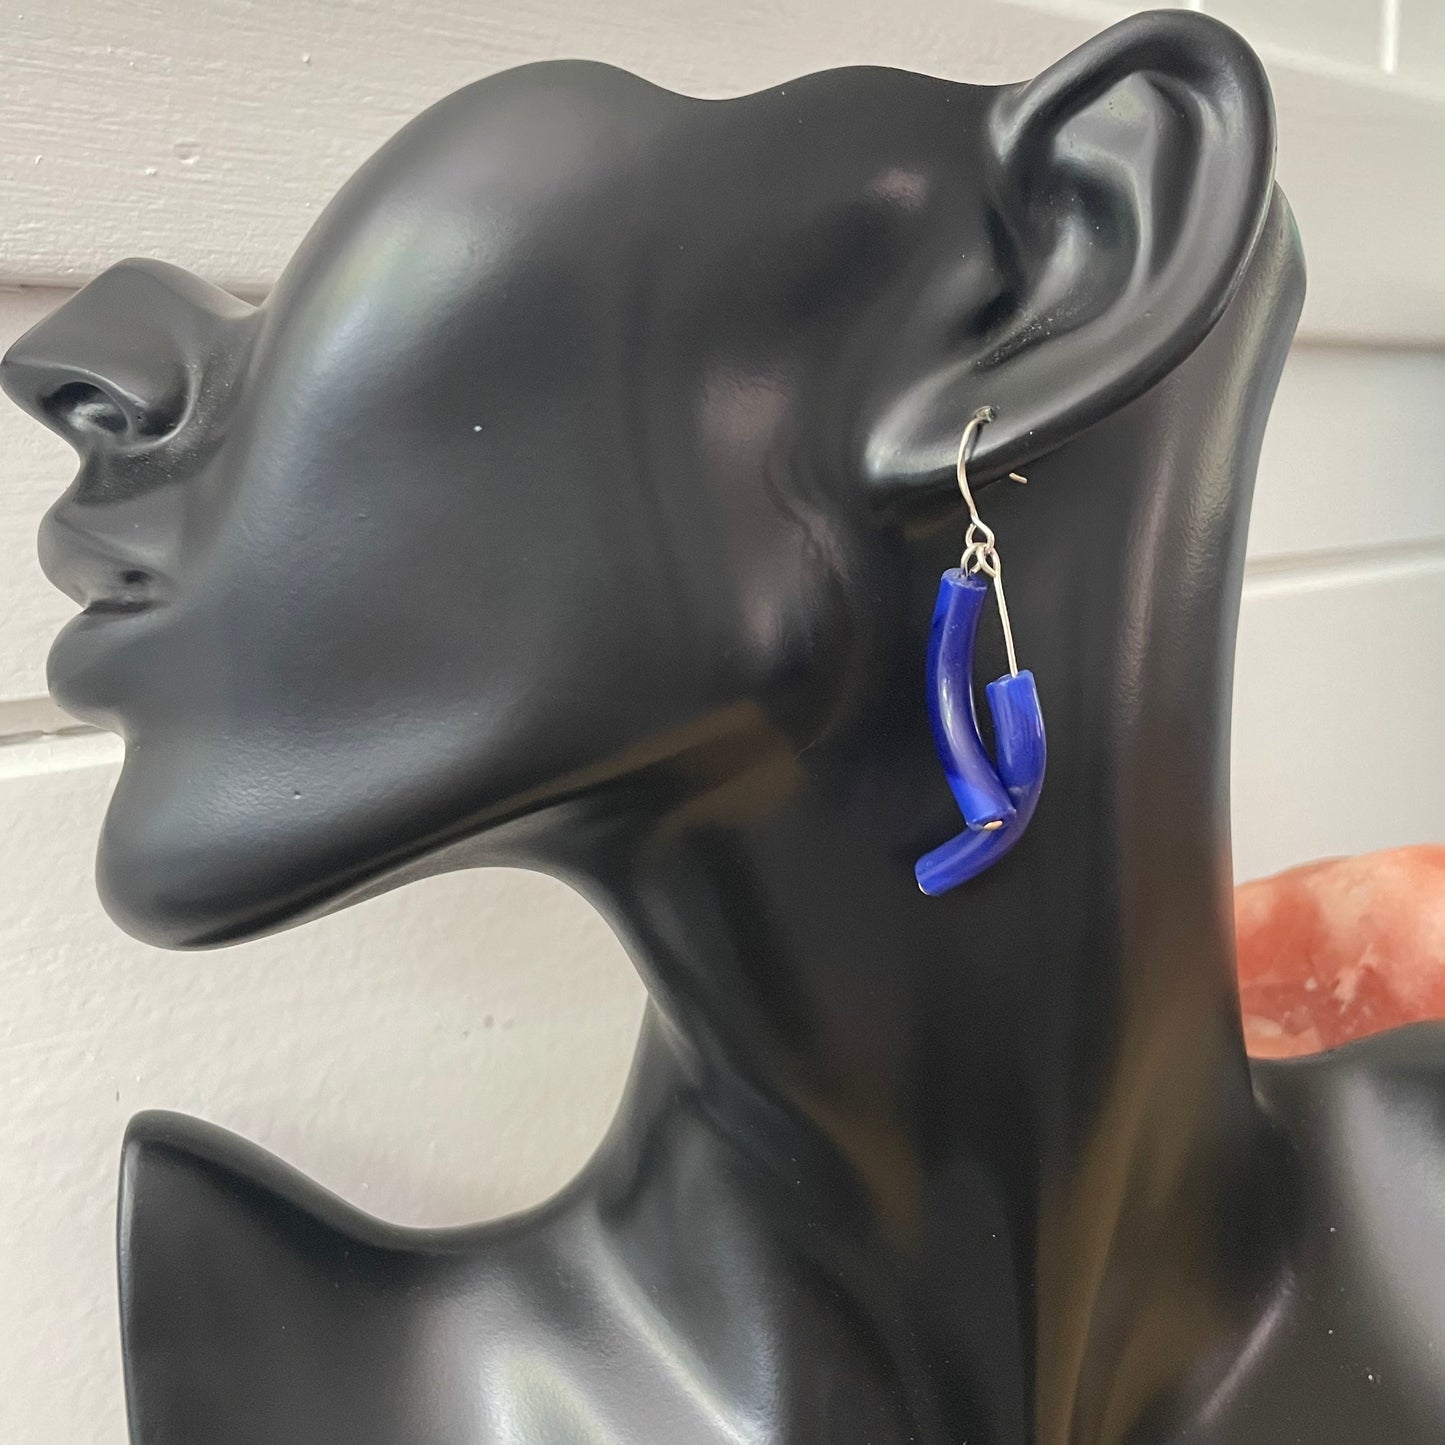 Dangling Dark Blue Curved Glass Earrings 2" Colorful Bold Versatile Daily Wear